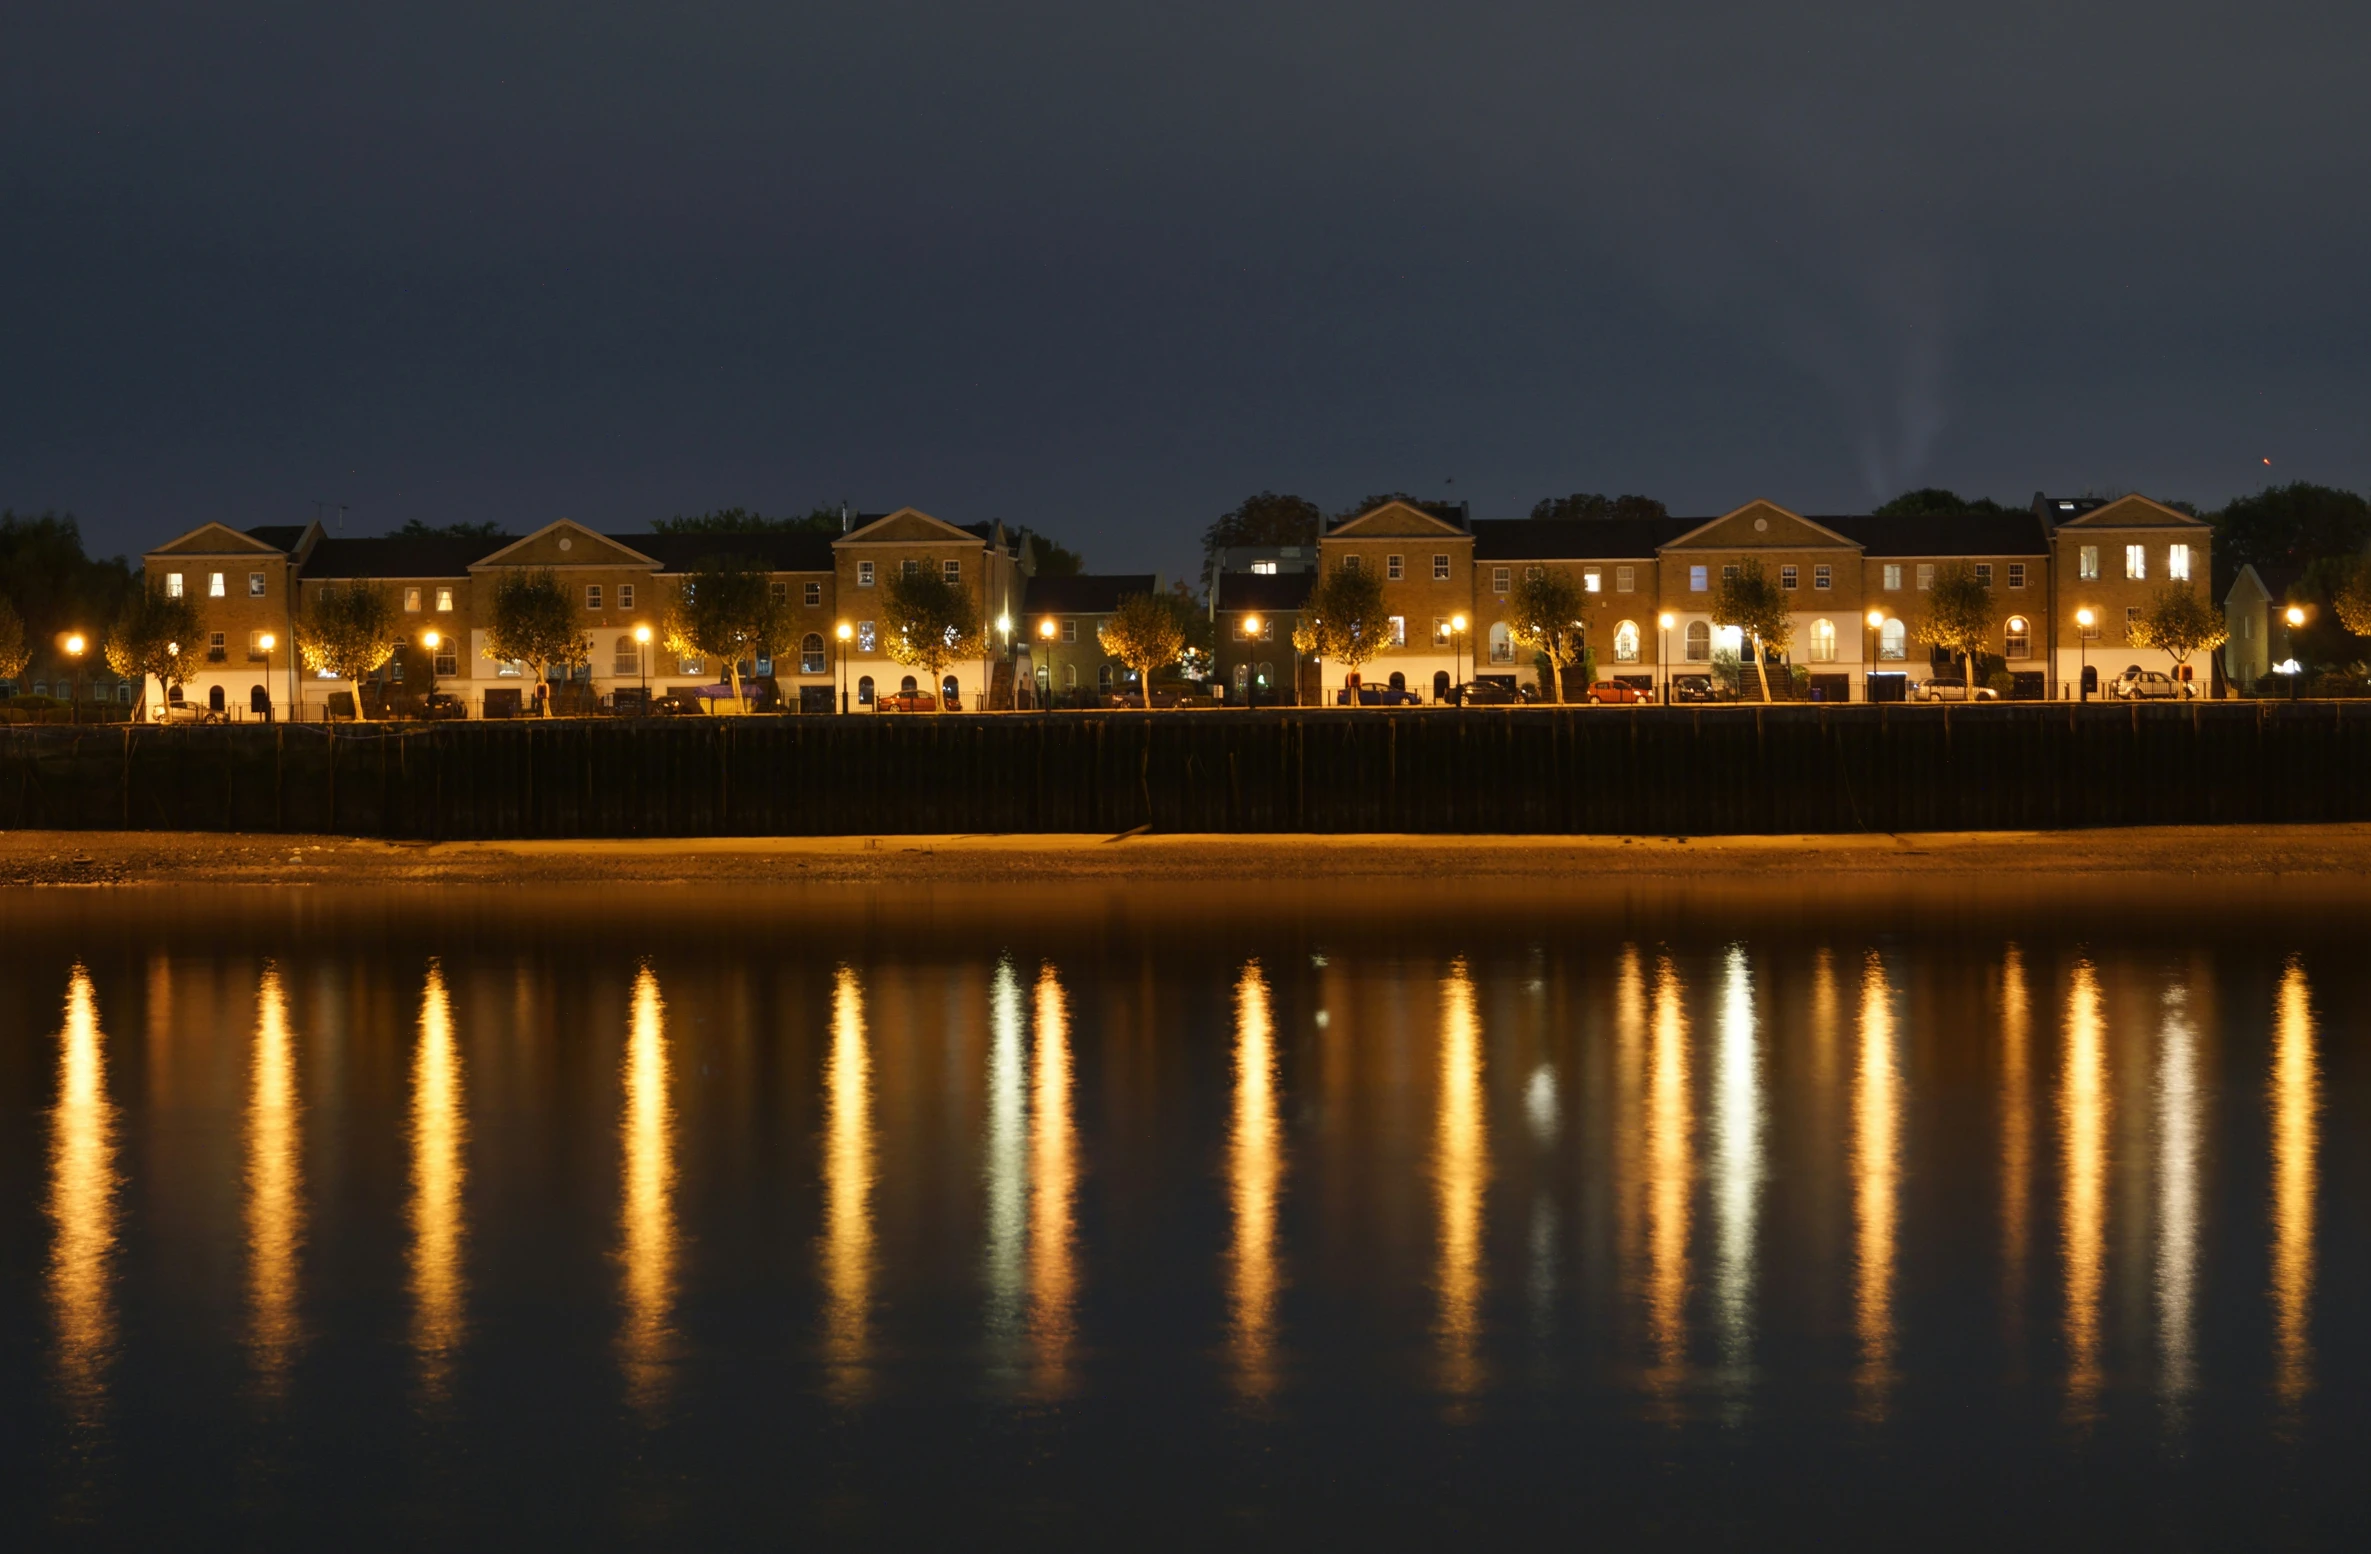 a row of houses beside the water at night